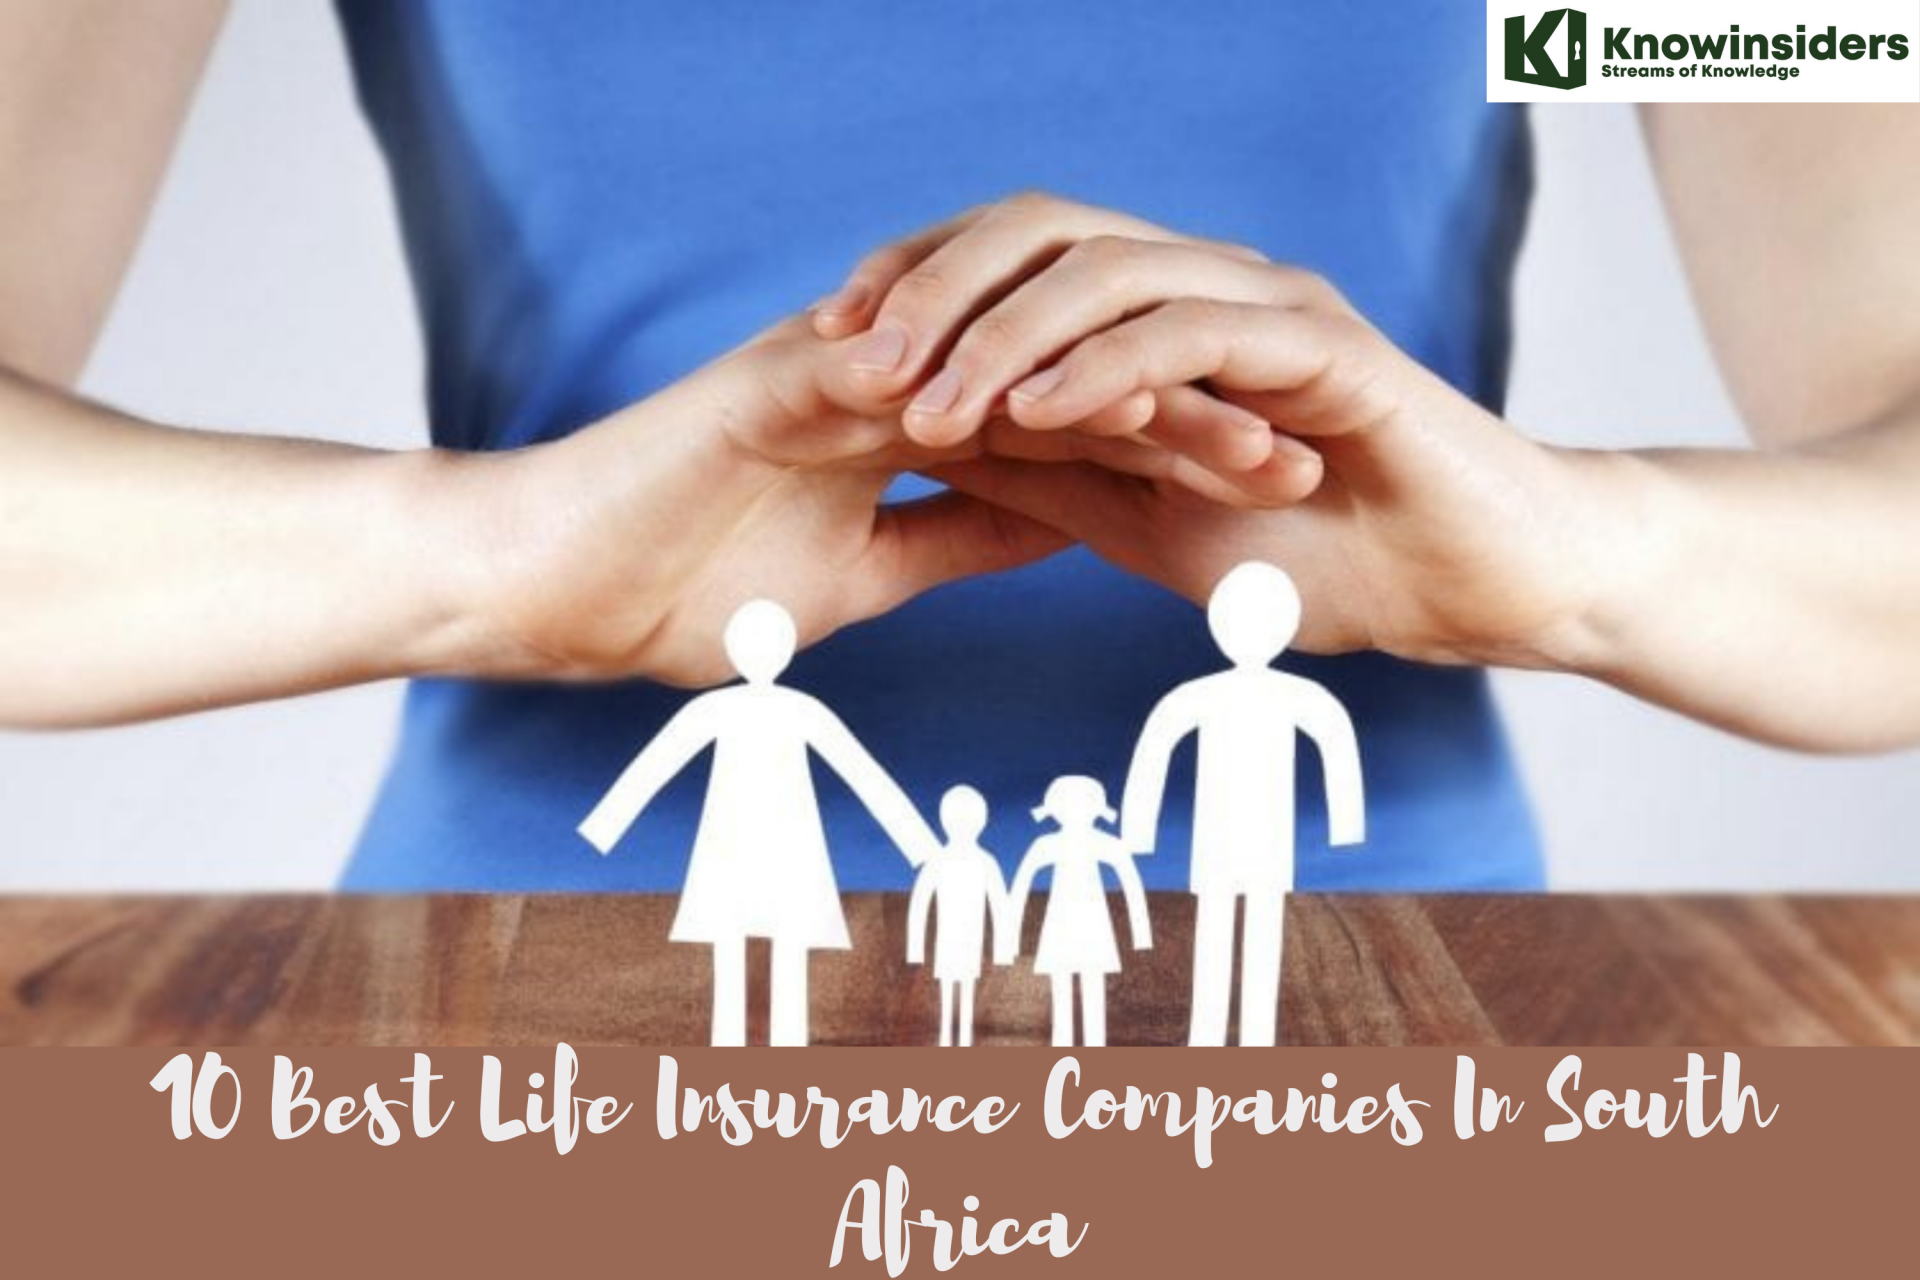 10 Best Life Insurance Companies In South Africa: Cheapest Quotes and Good Services